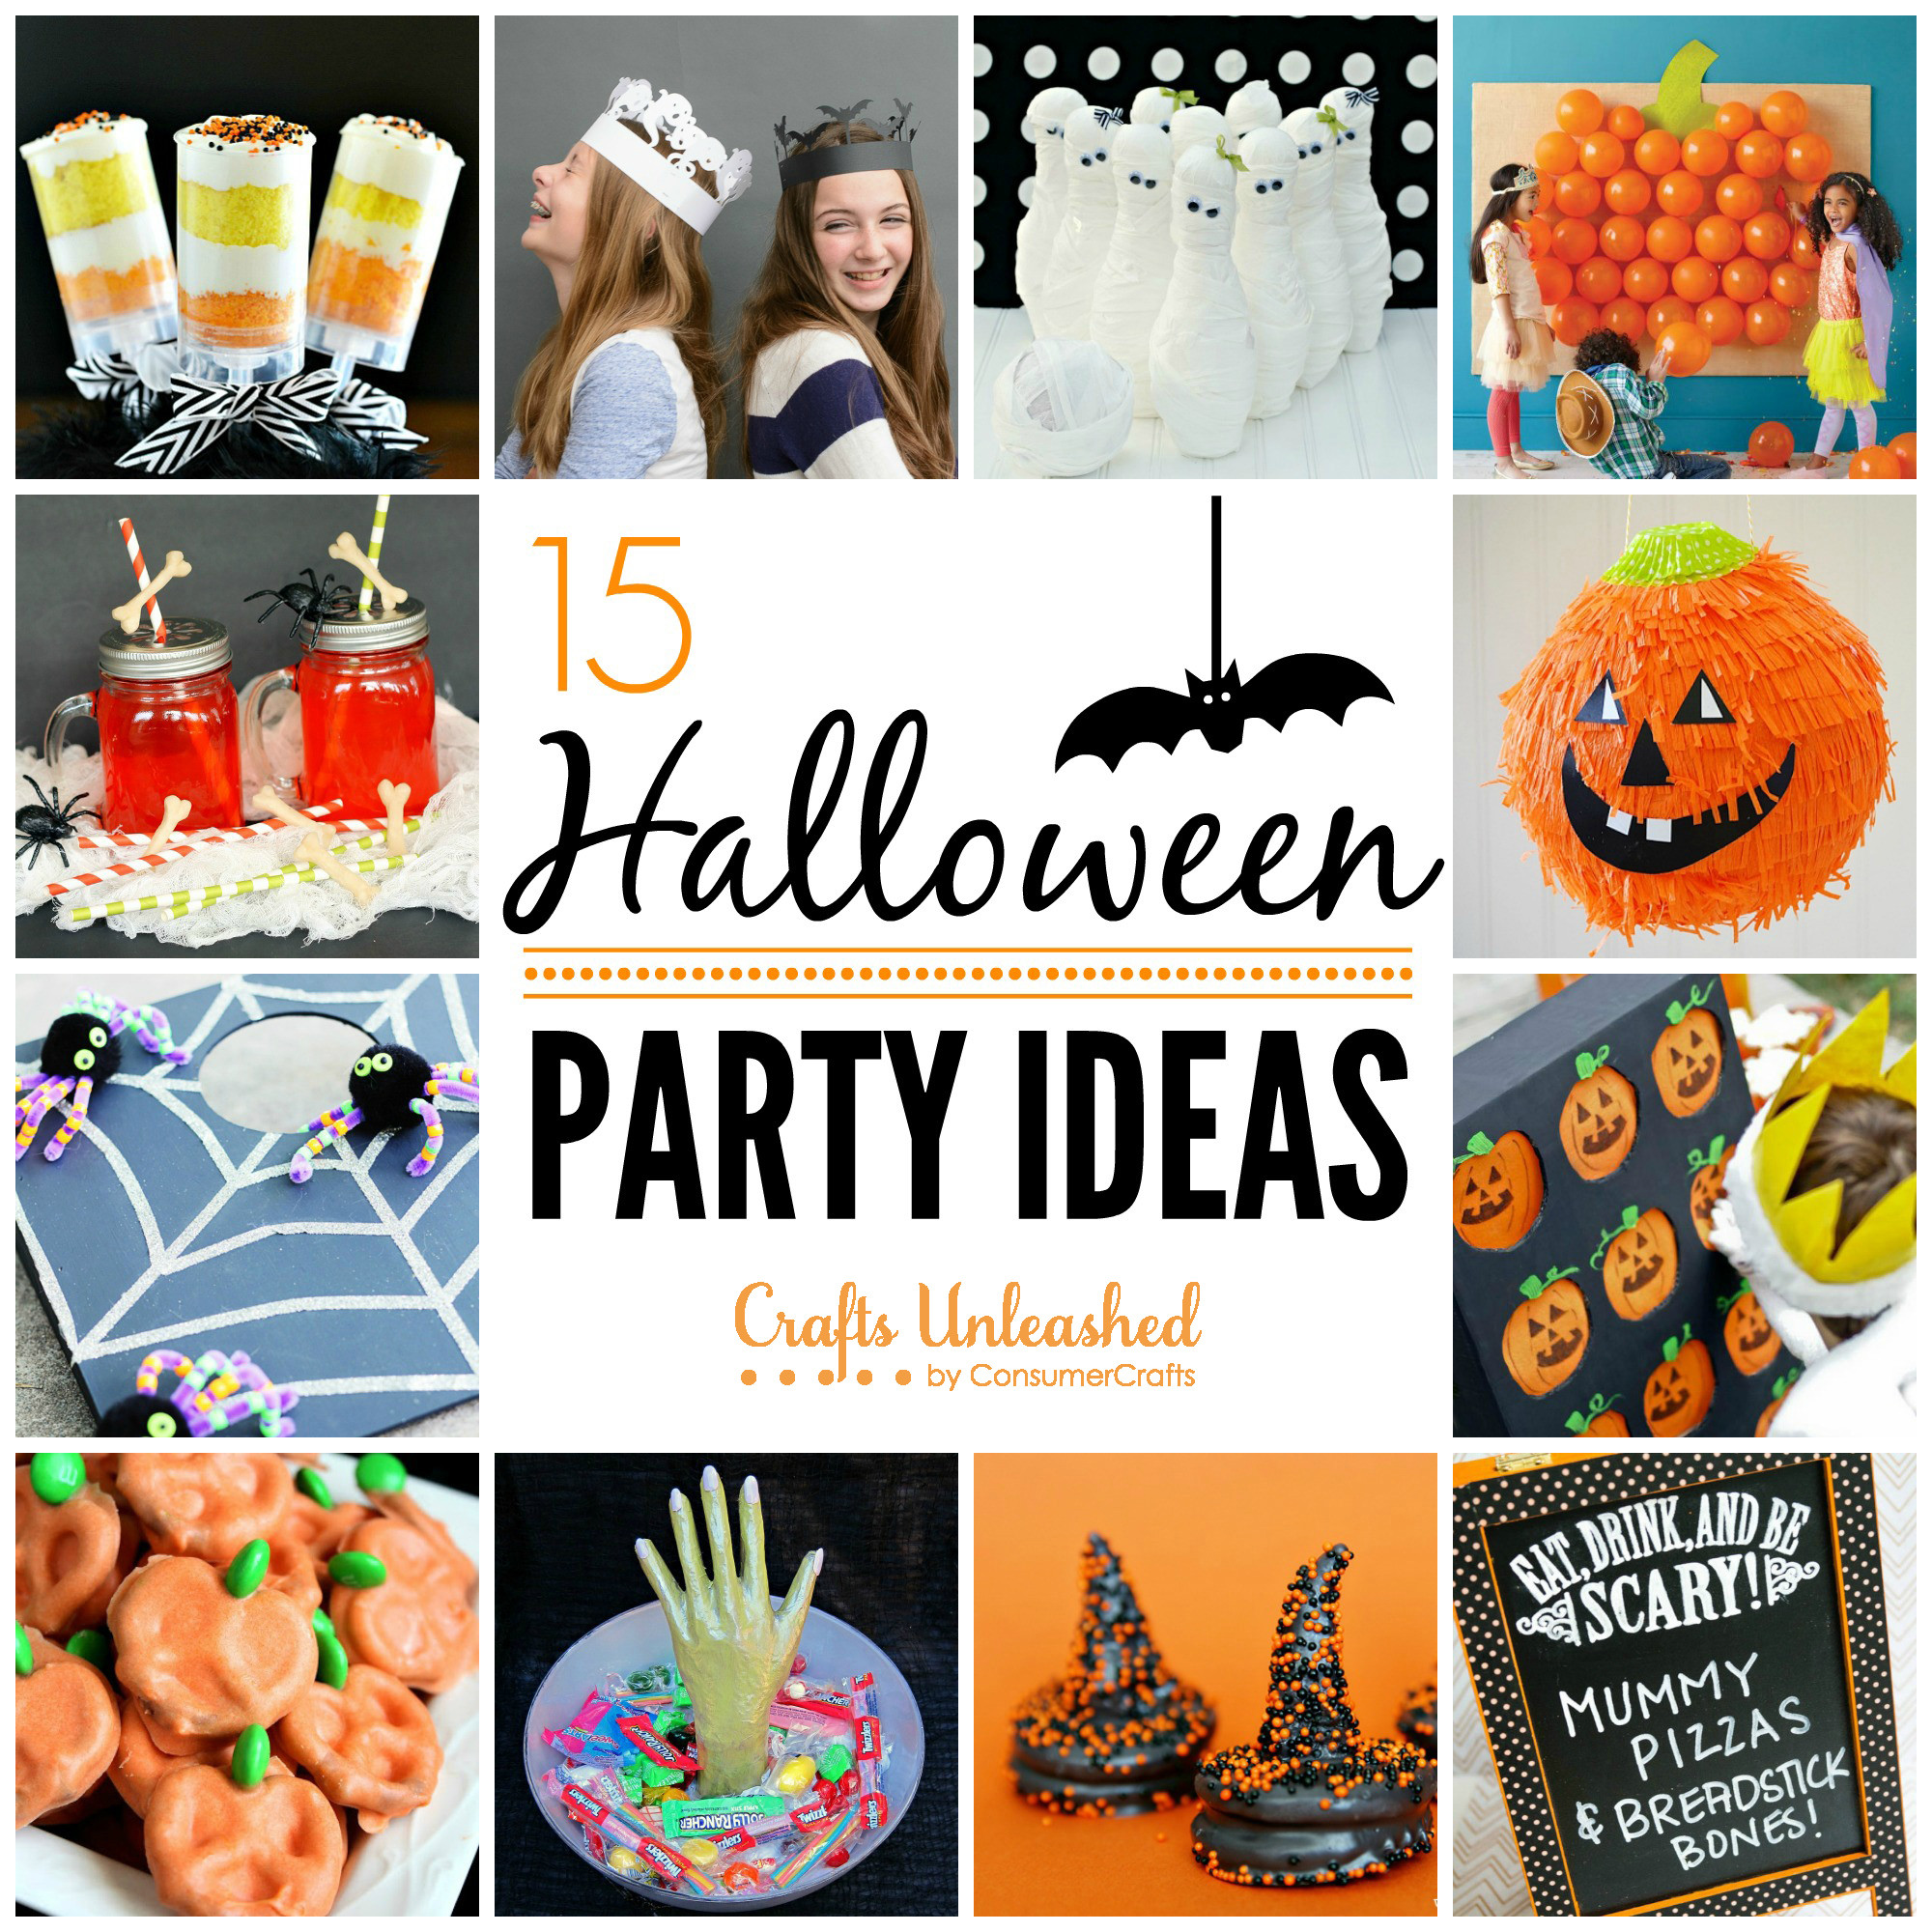 DIY Halloween Party Decor
 Halloween Party Ideas Crafts Unleashed